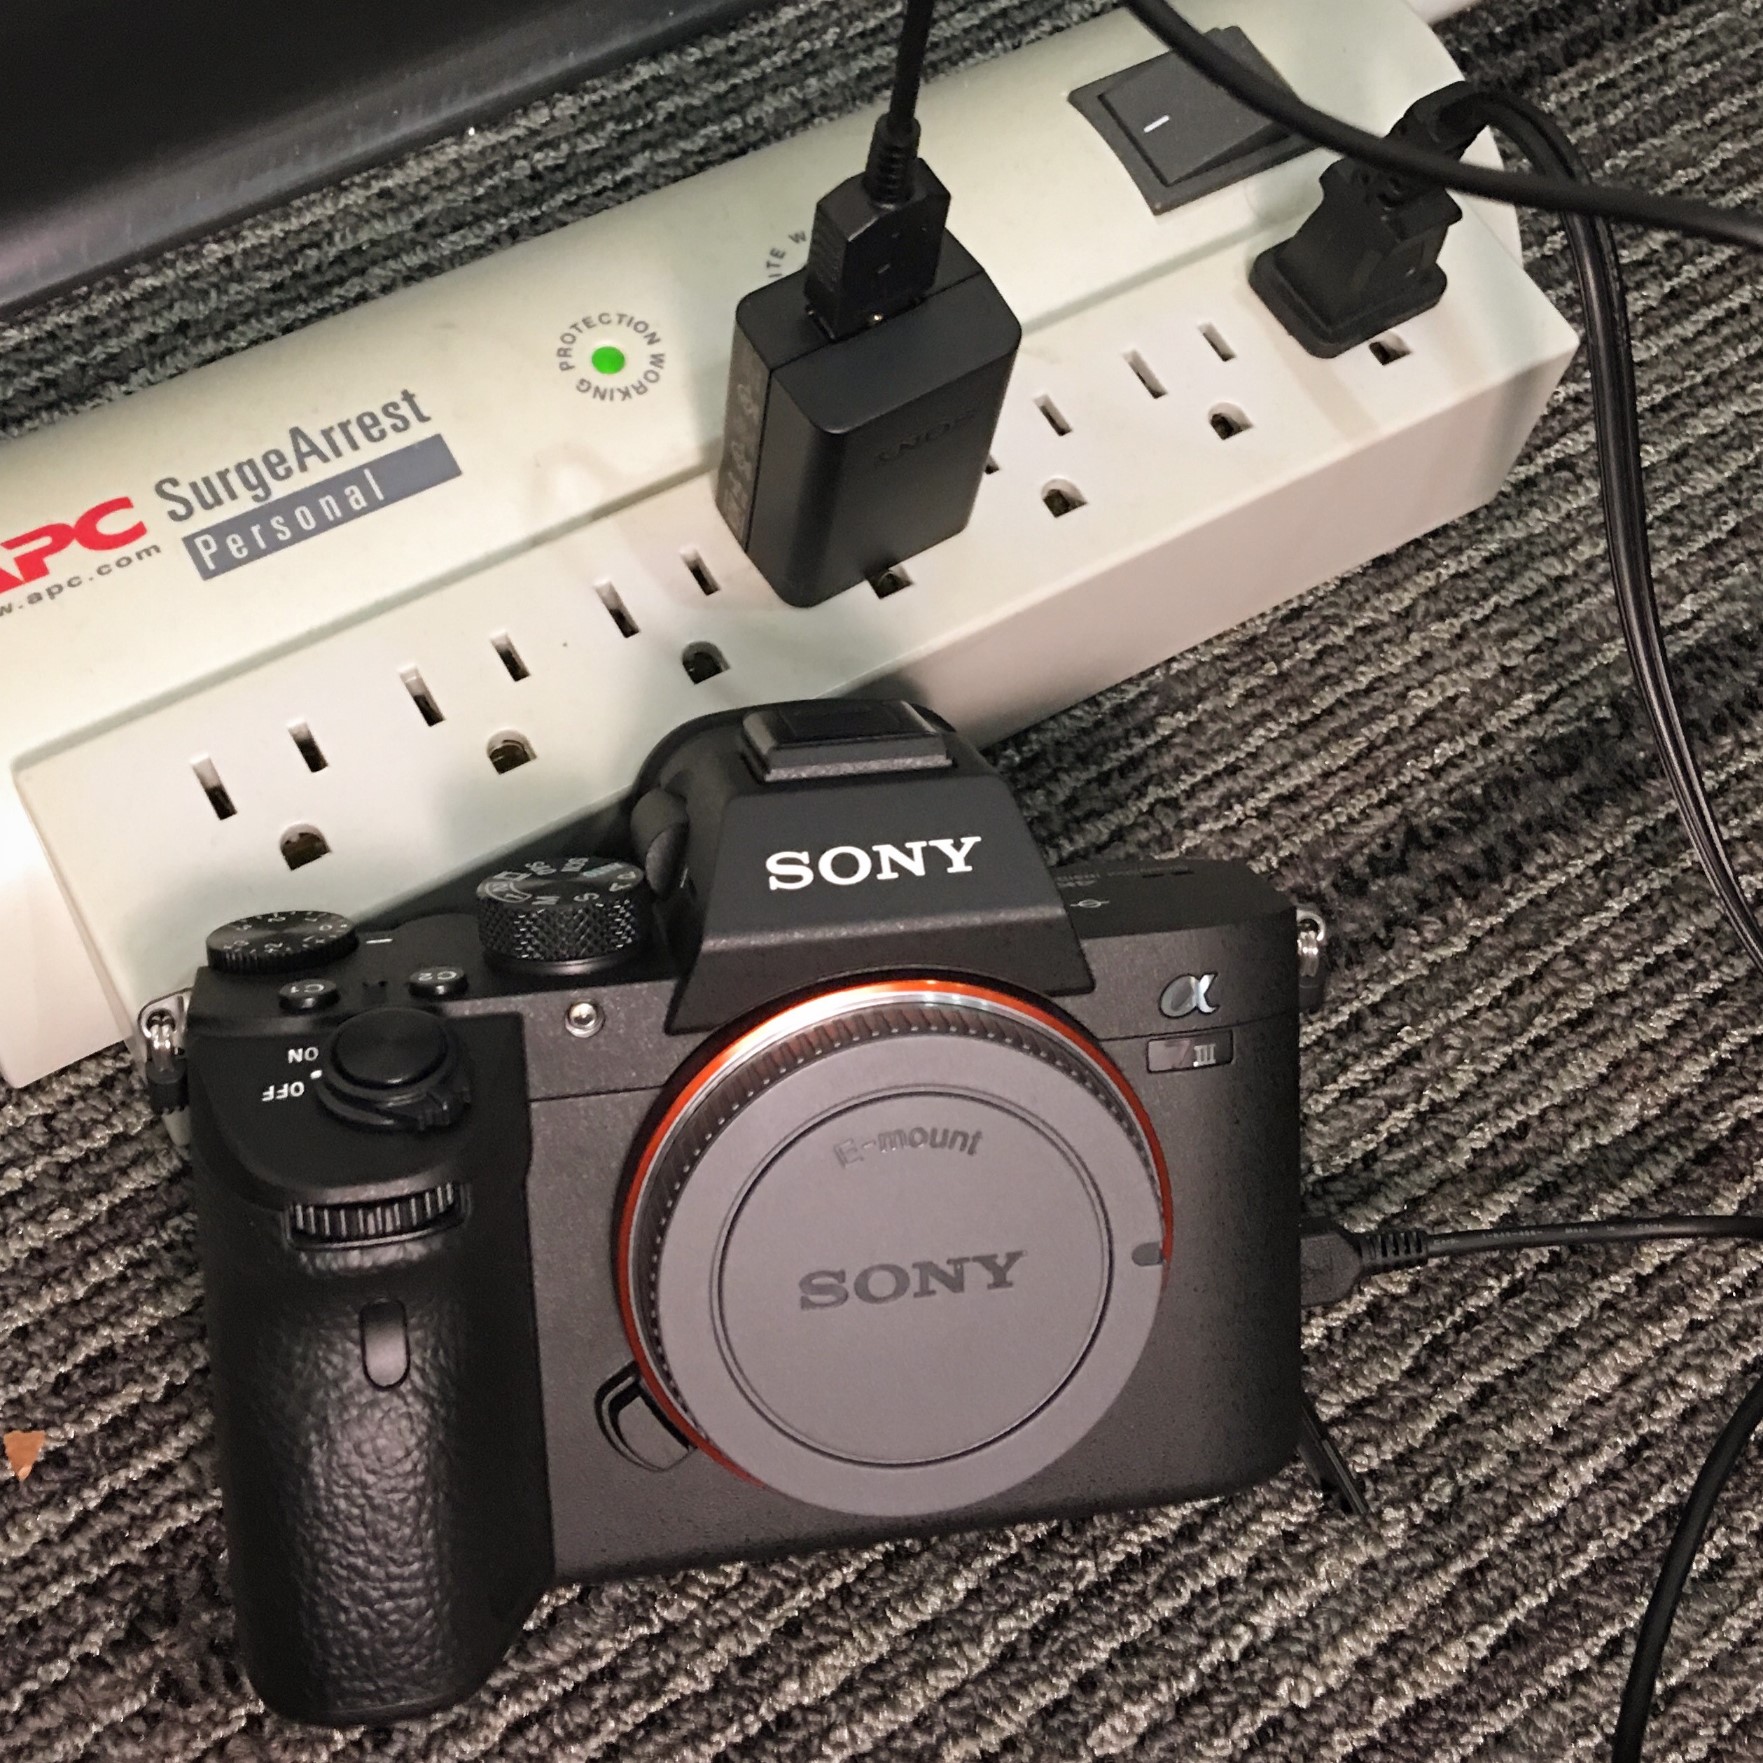 Teenageår hypotese Yoghurt Battery and charger options for the "charger-less" Sony a7 III - Newsshooter